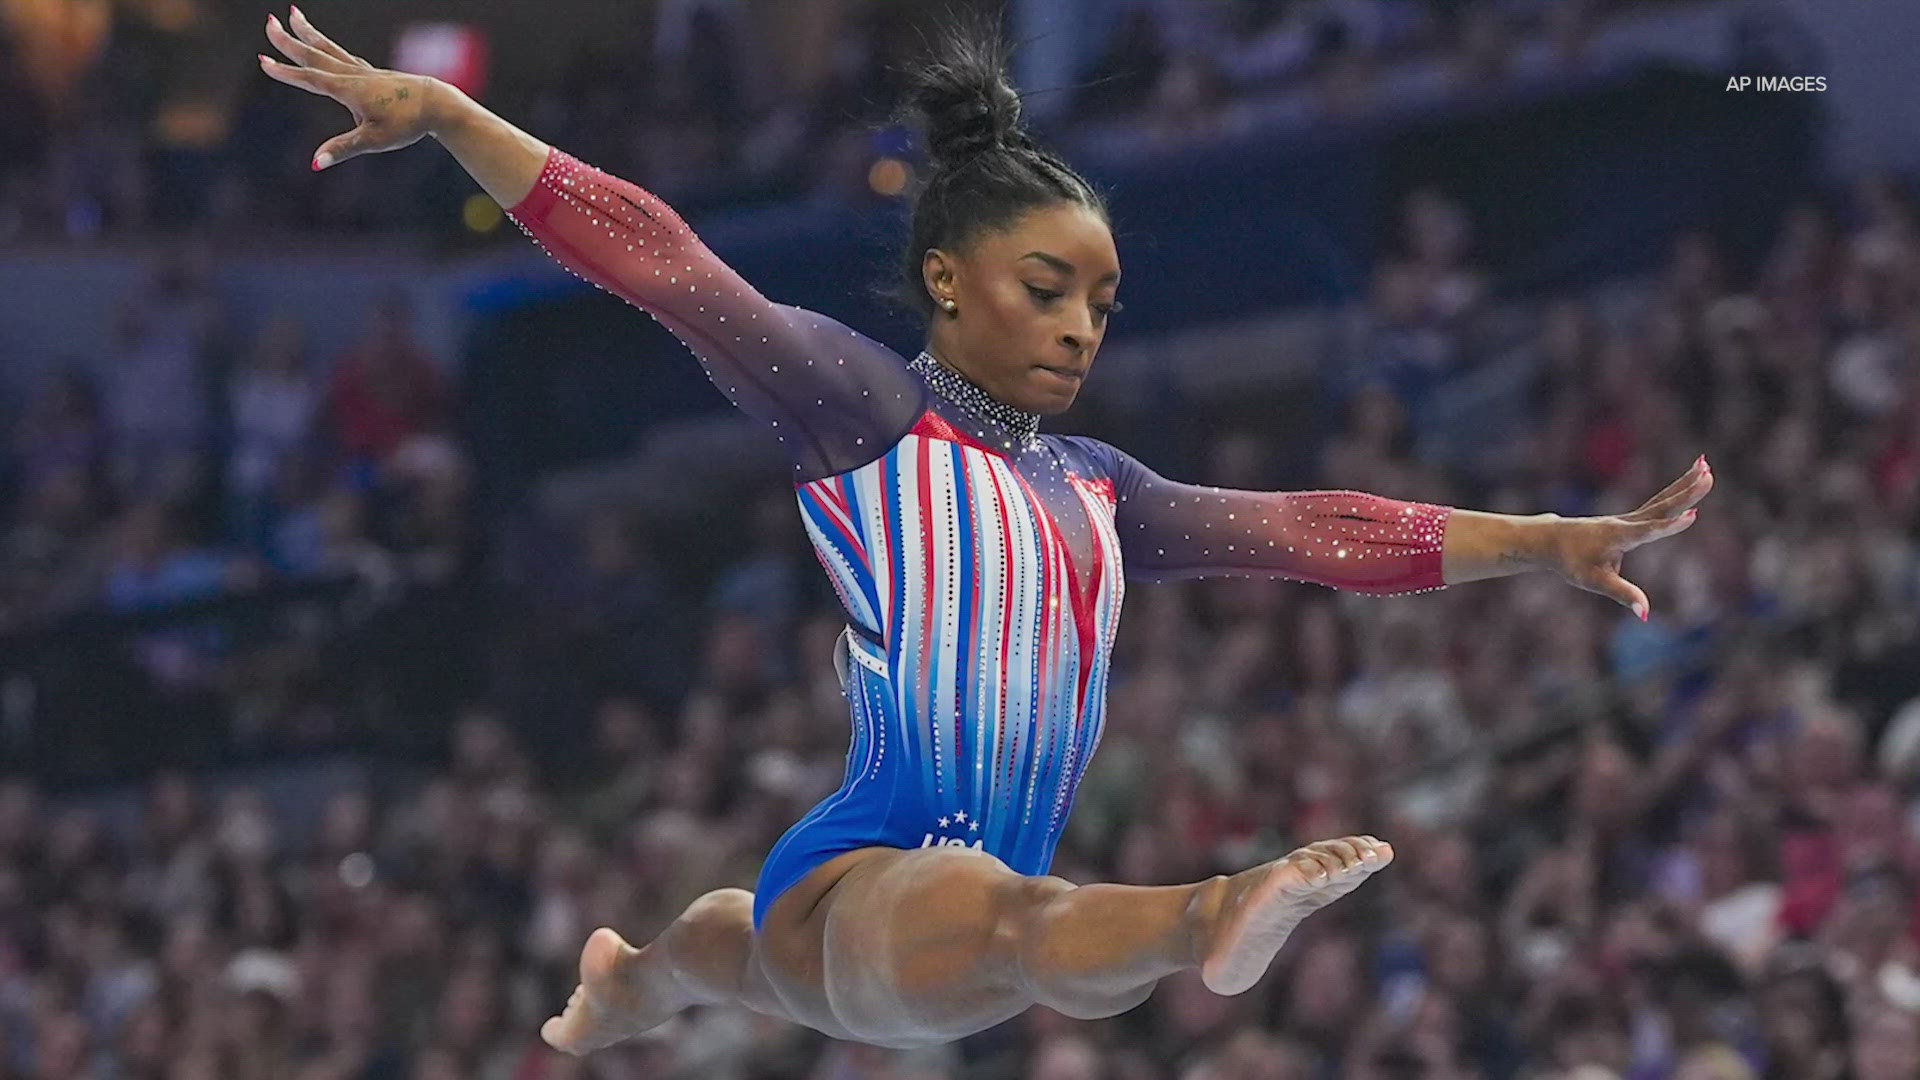 Simone Biles posted a two-day all-around total of 117.225 to clinch the lone automatic spot on the five-woman team.